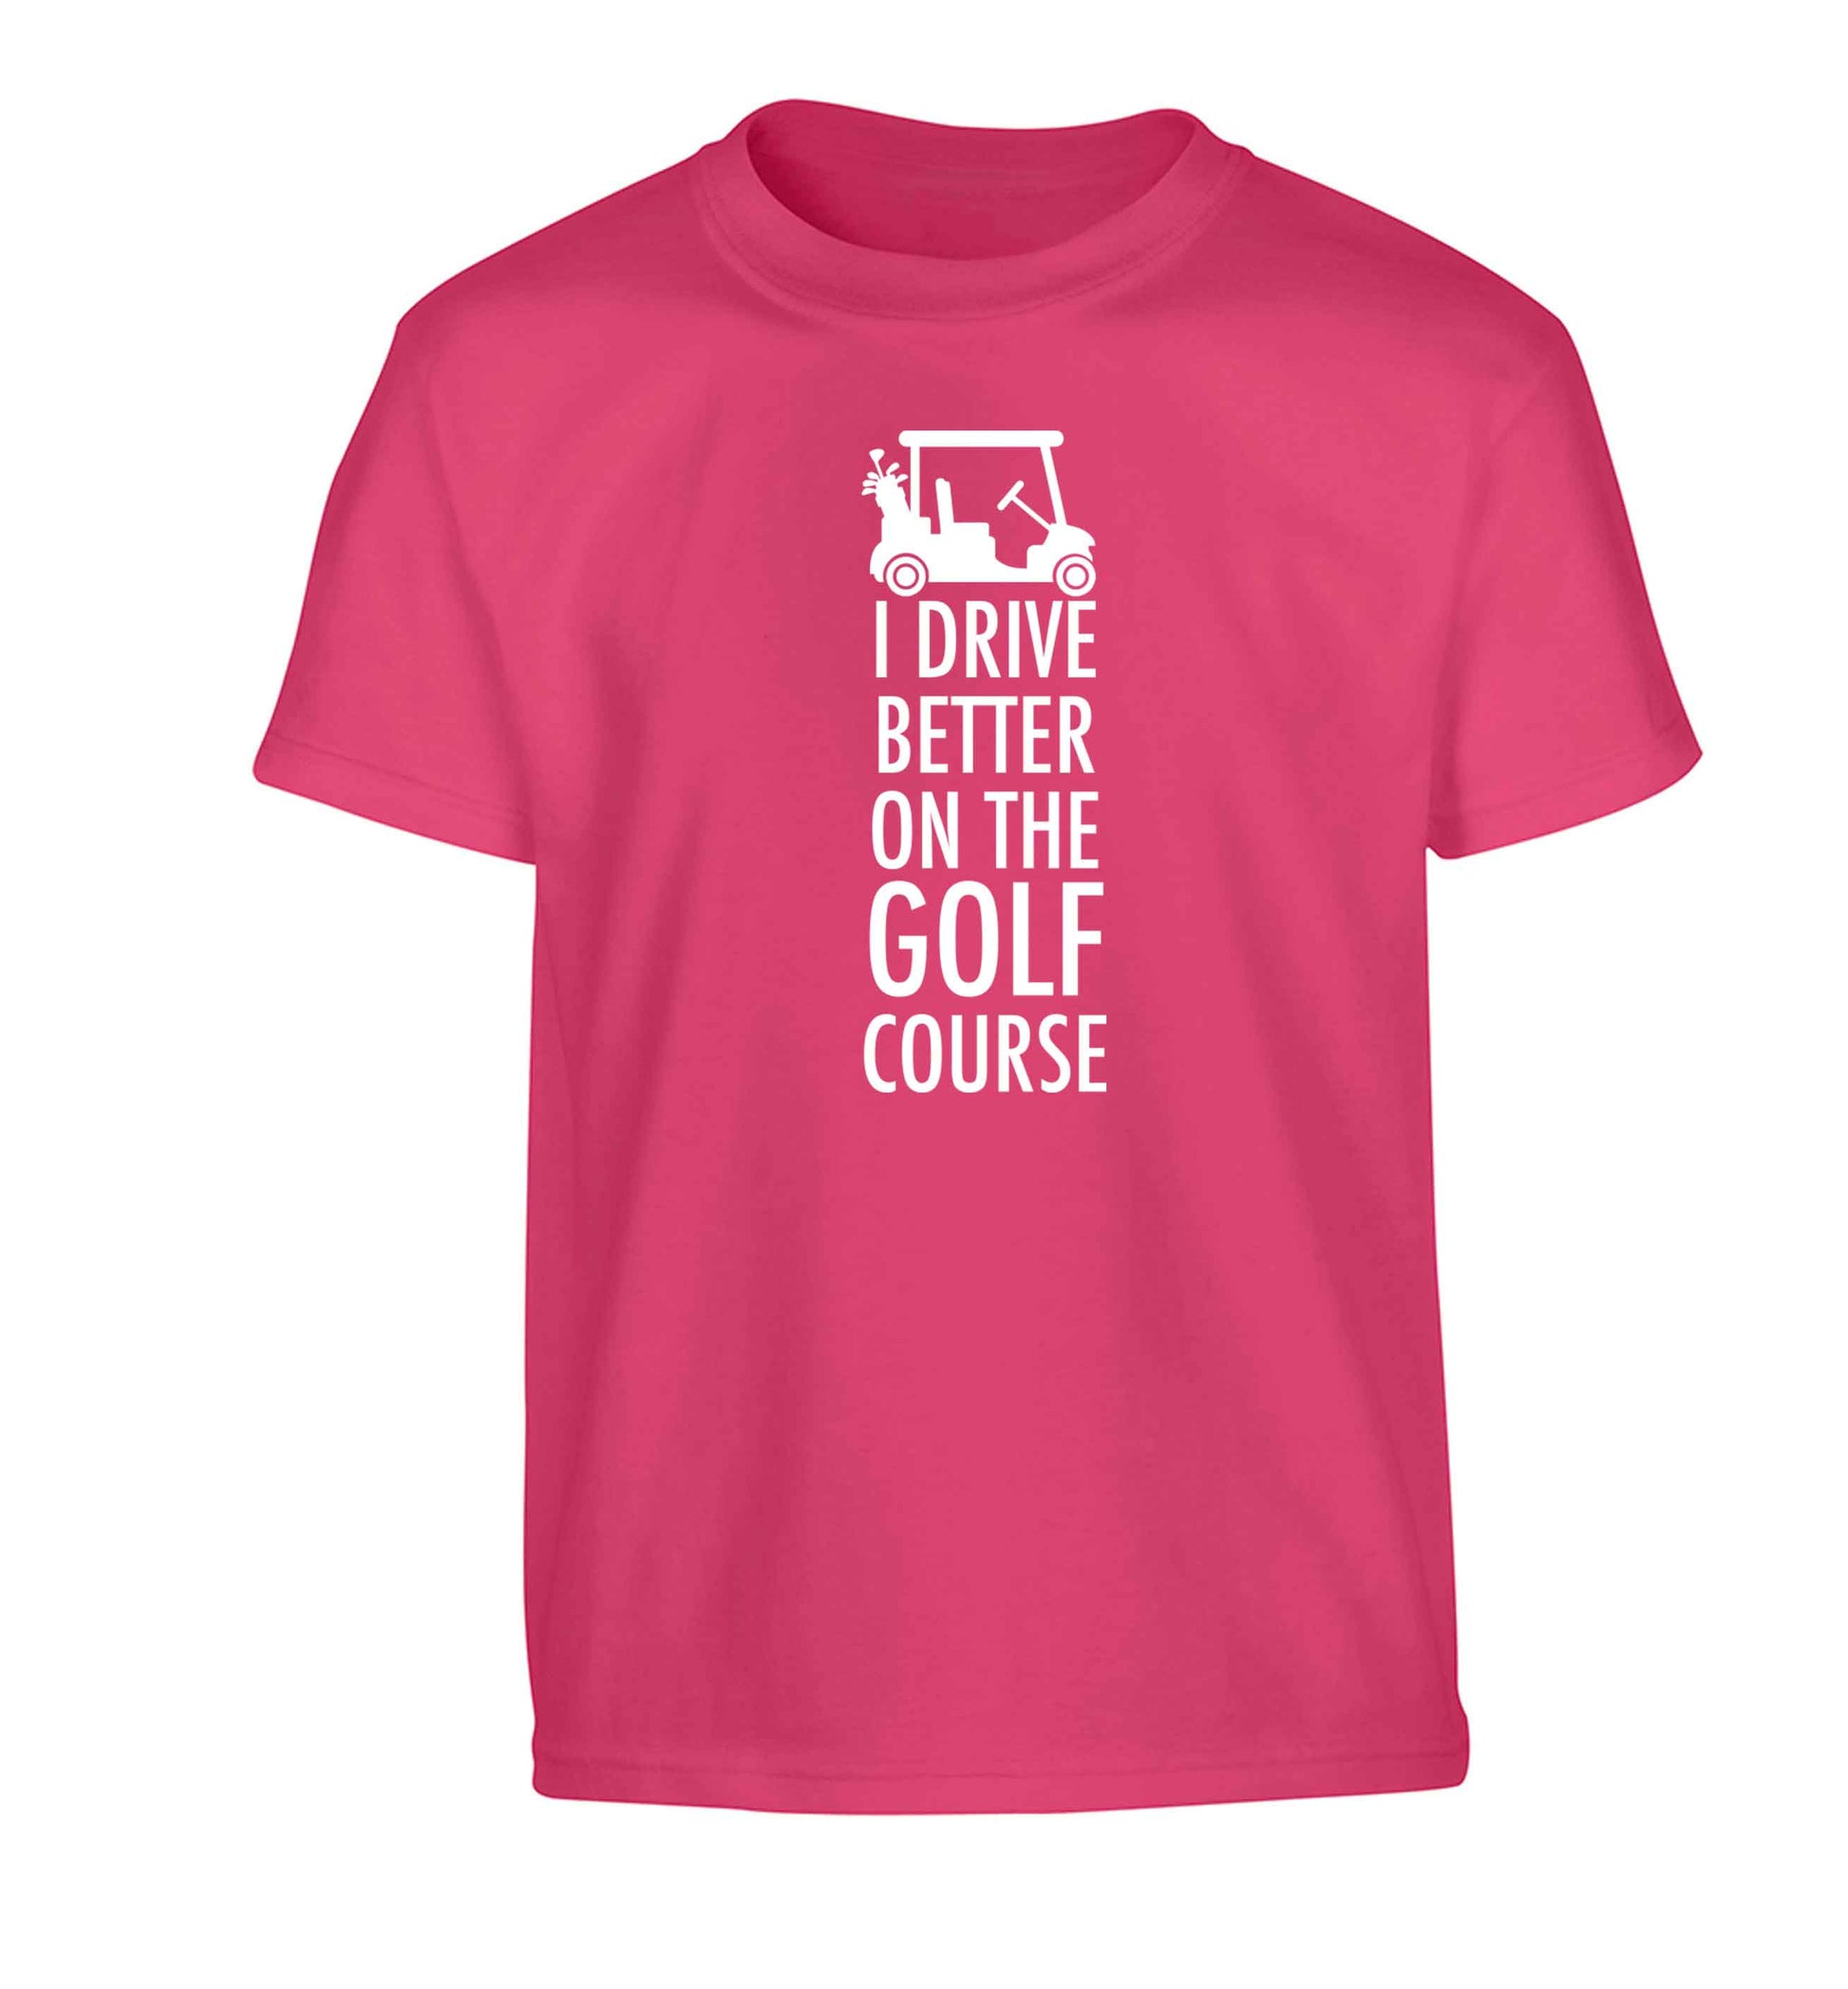 I drive better on the golf course Children's pink Tshirt 12-13 Years